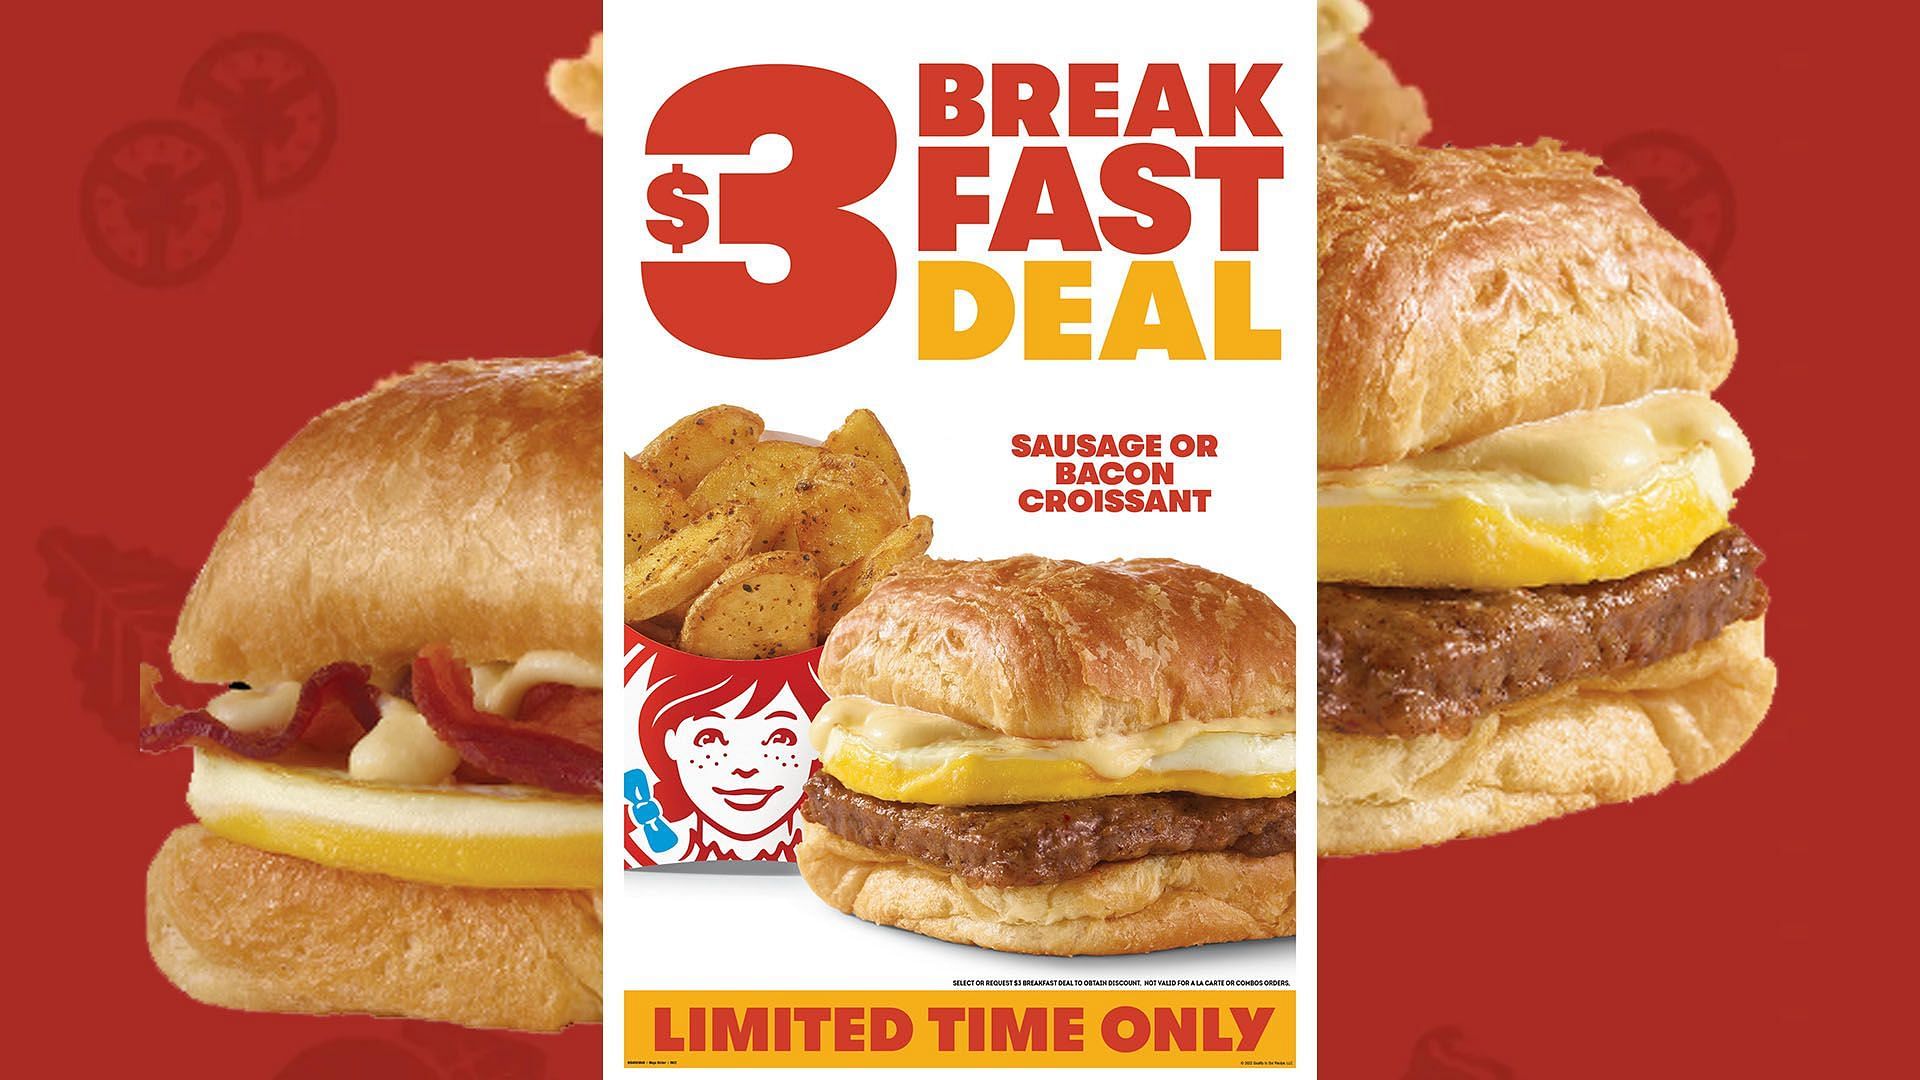 Wendy's offer 2 for $3 breakfast combo deal - South Florida on the